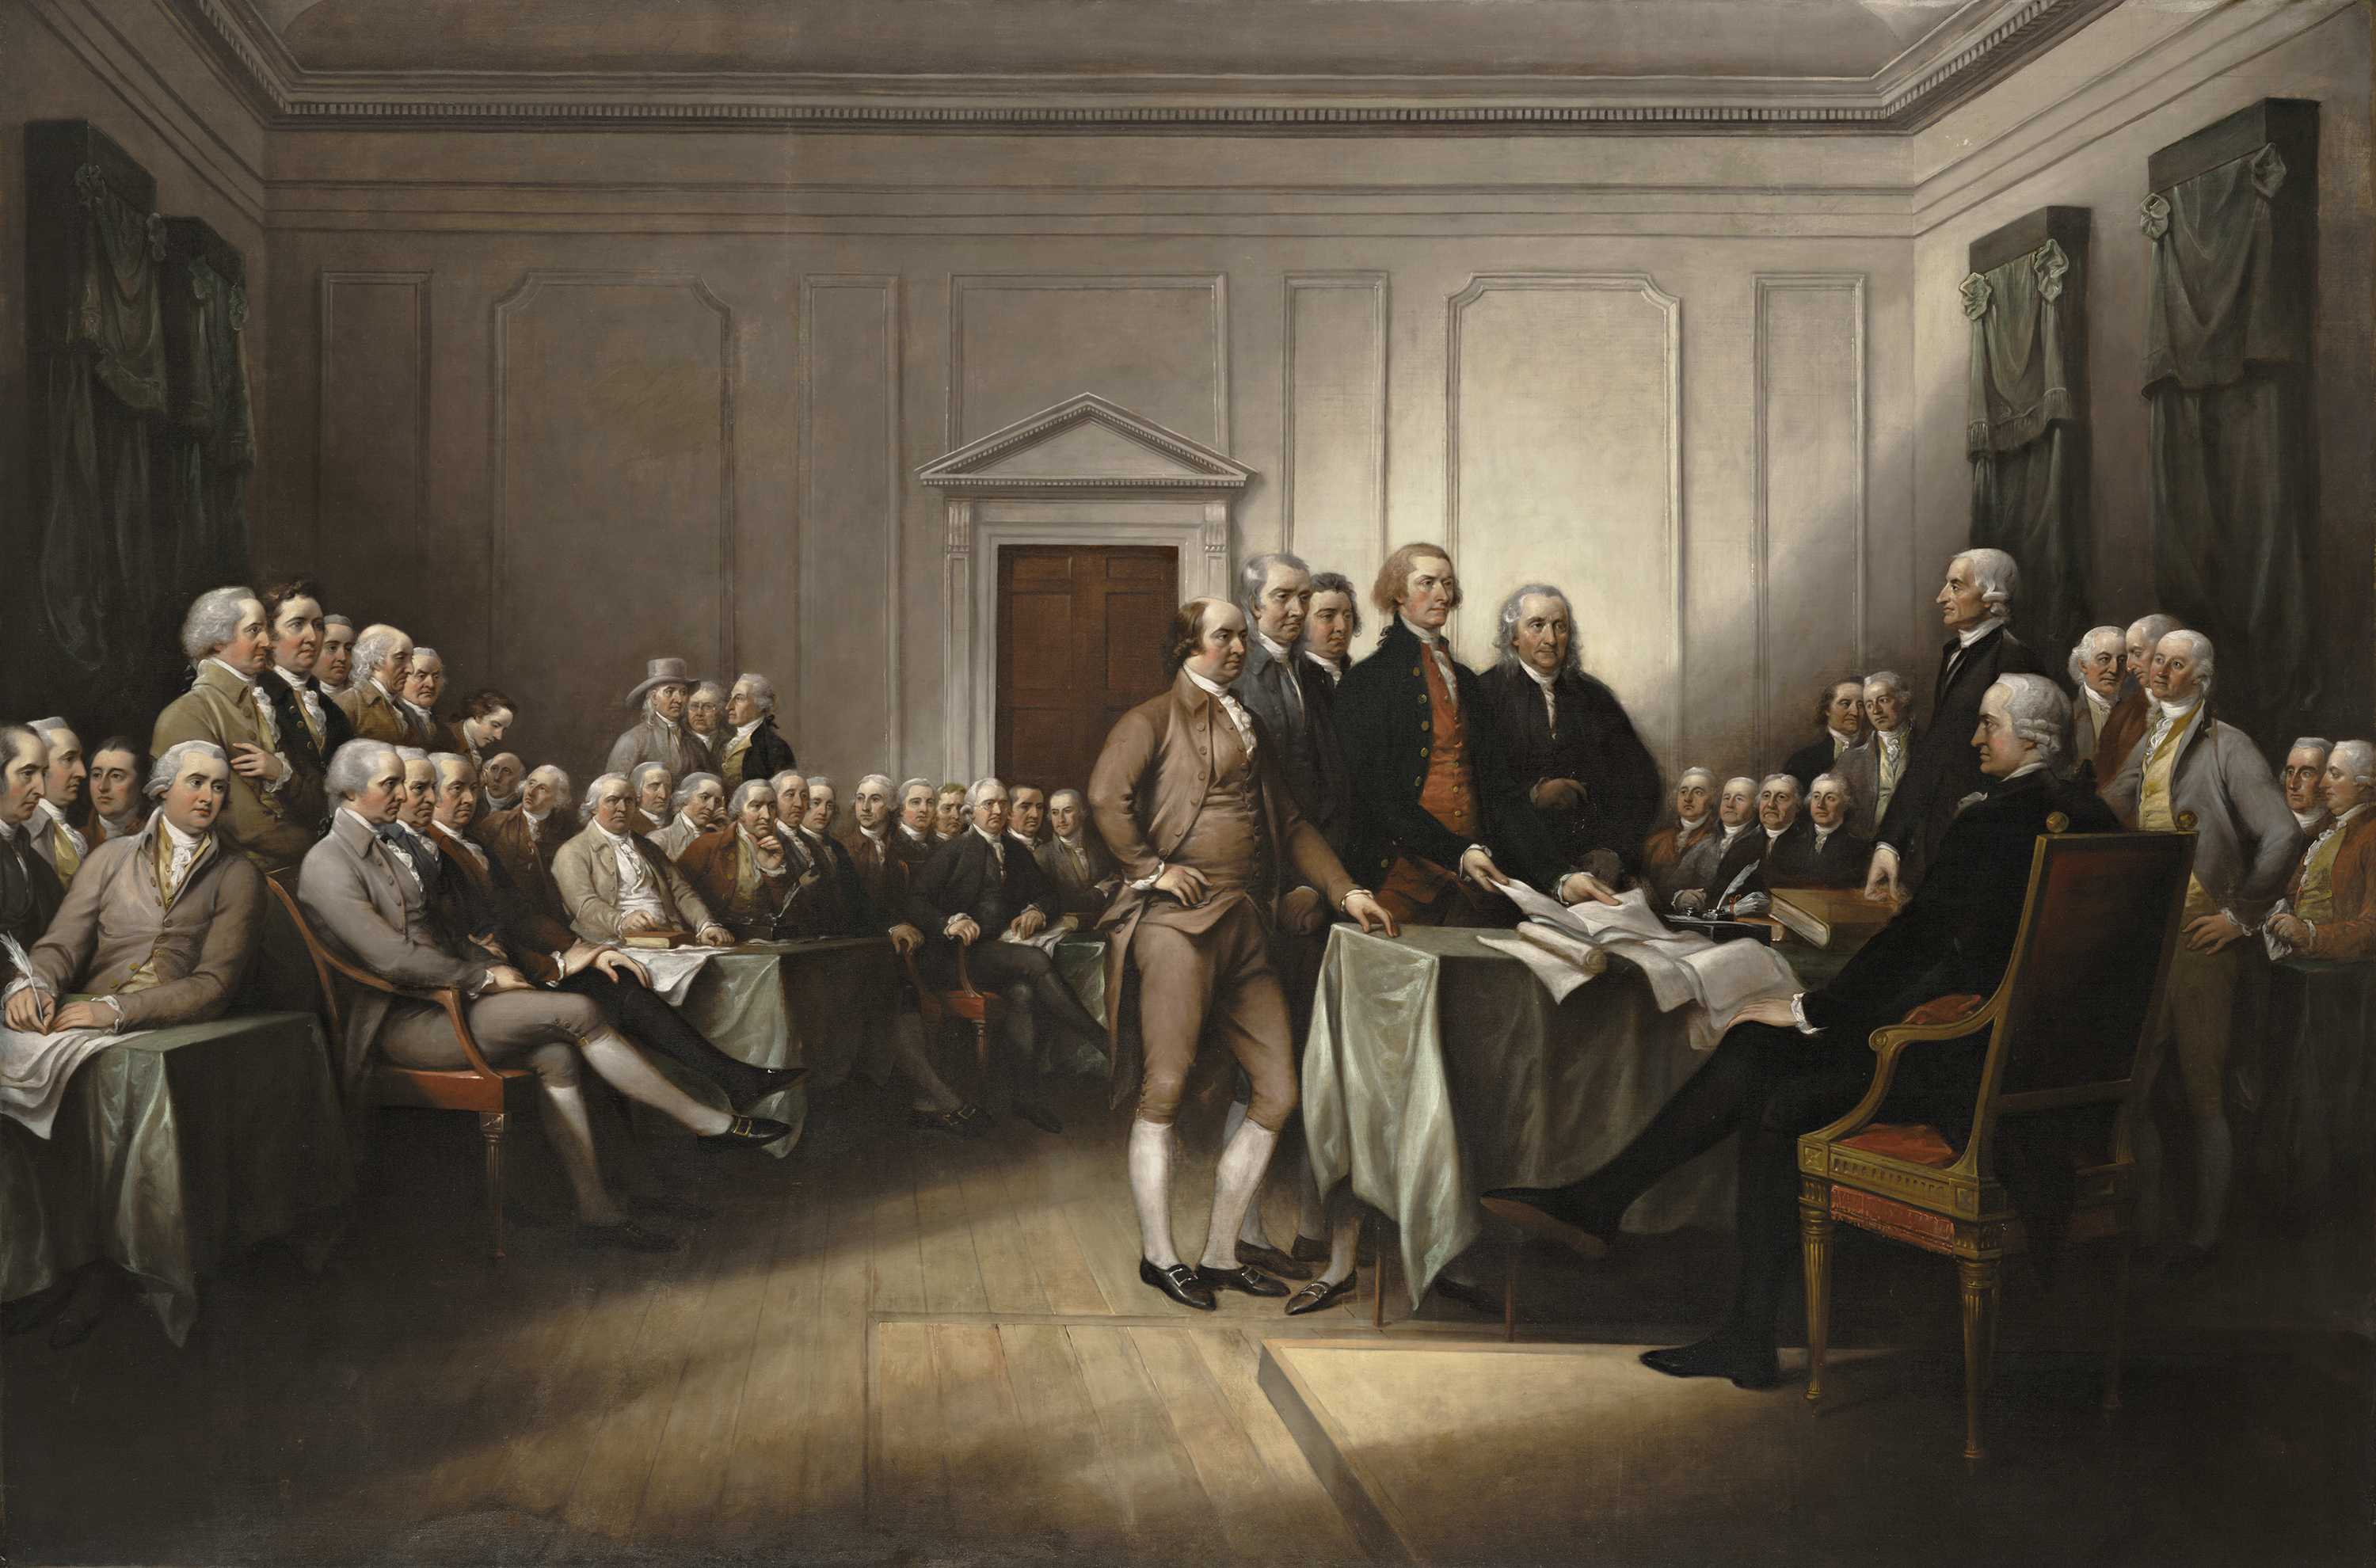 John Trumbull (American, 1756−1843) The Declaration of Independence, July 4, 1776, 1832 Oil on canvas Wadsworth Atheneum Museum of Art, Hartford, CT Purchased by Daniel Wadsworth and members of the Atheneum Committee, 1844.3 Photography credit: Allen Phillips/Wadsworth Atheneum